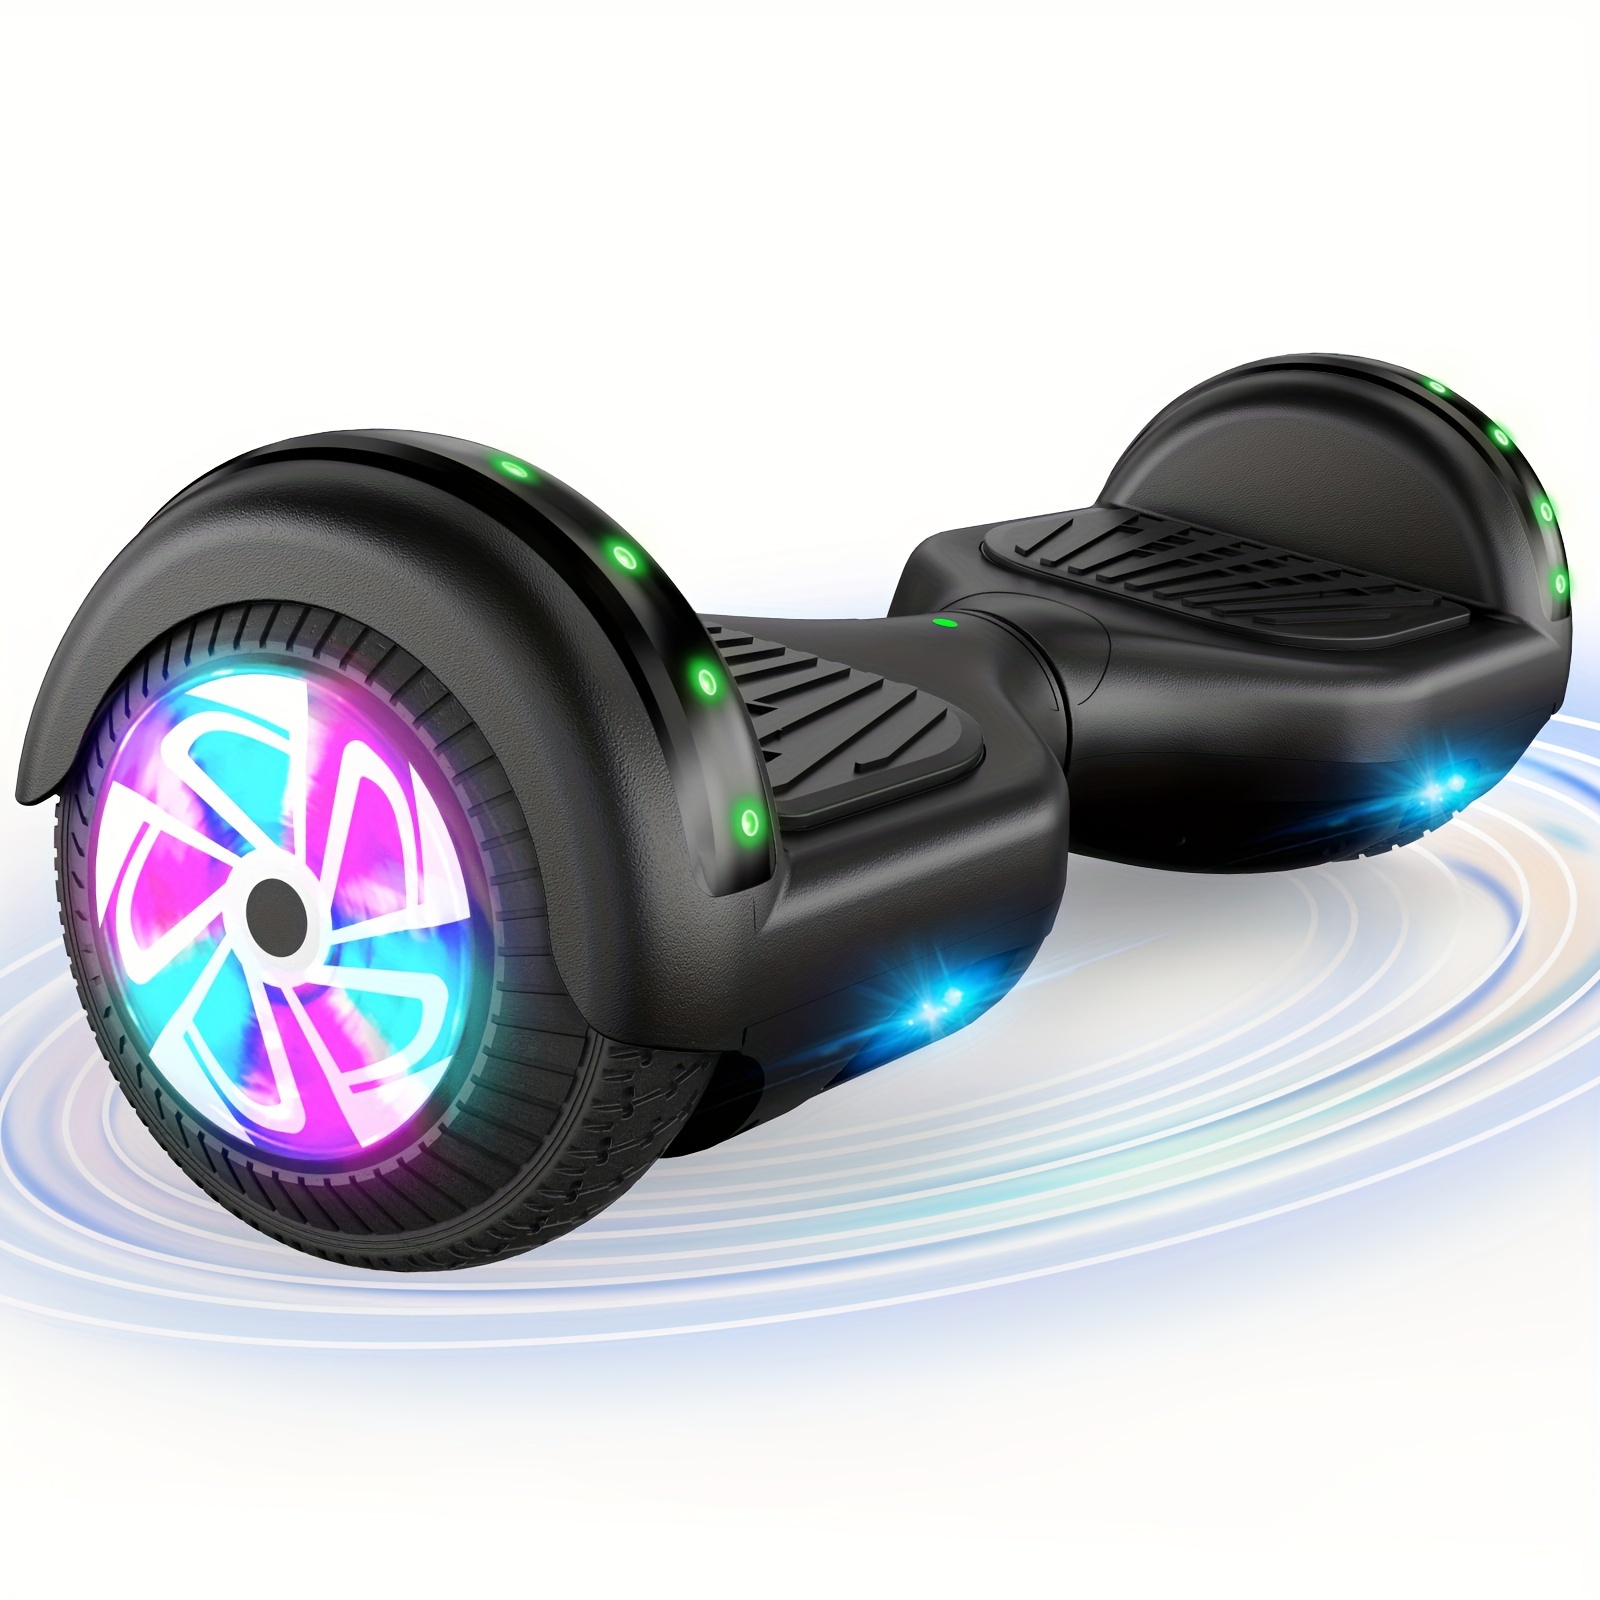 

Sisigad Wireless Hoverboard, 6.5" Listed 2 Wheel Self Balancing Electric Scooter With Led Lights, Black